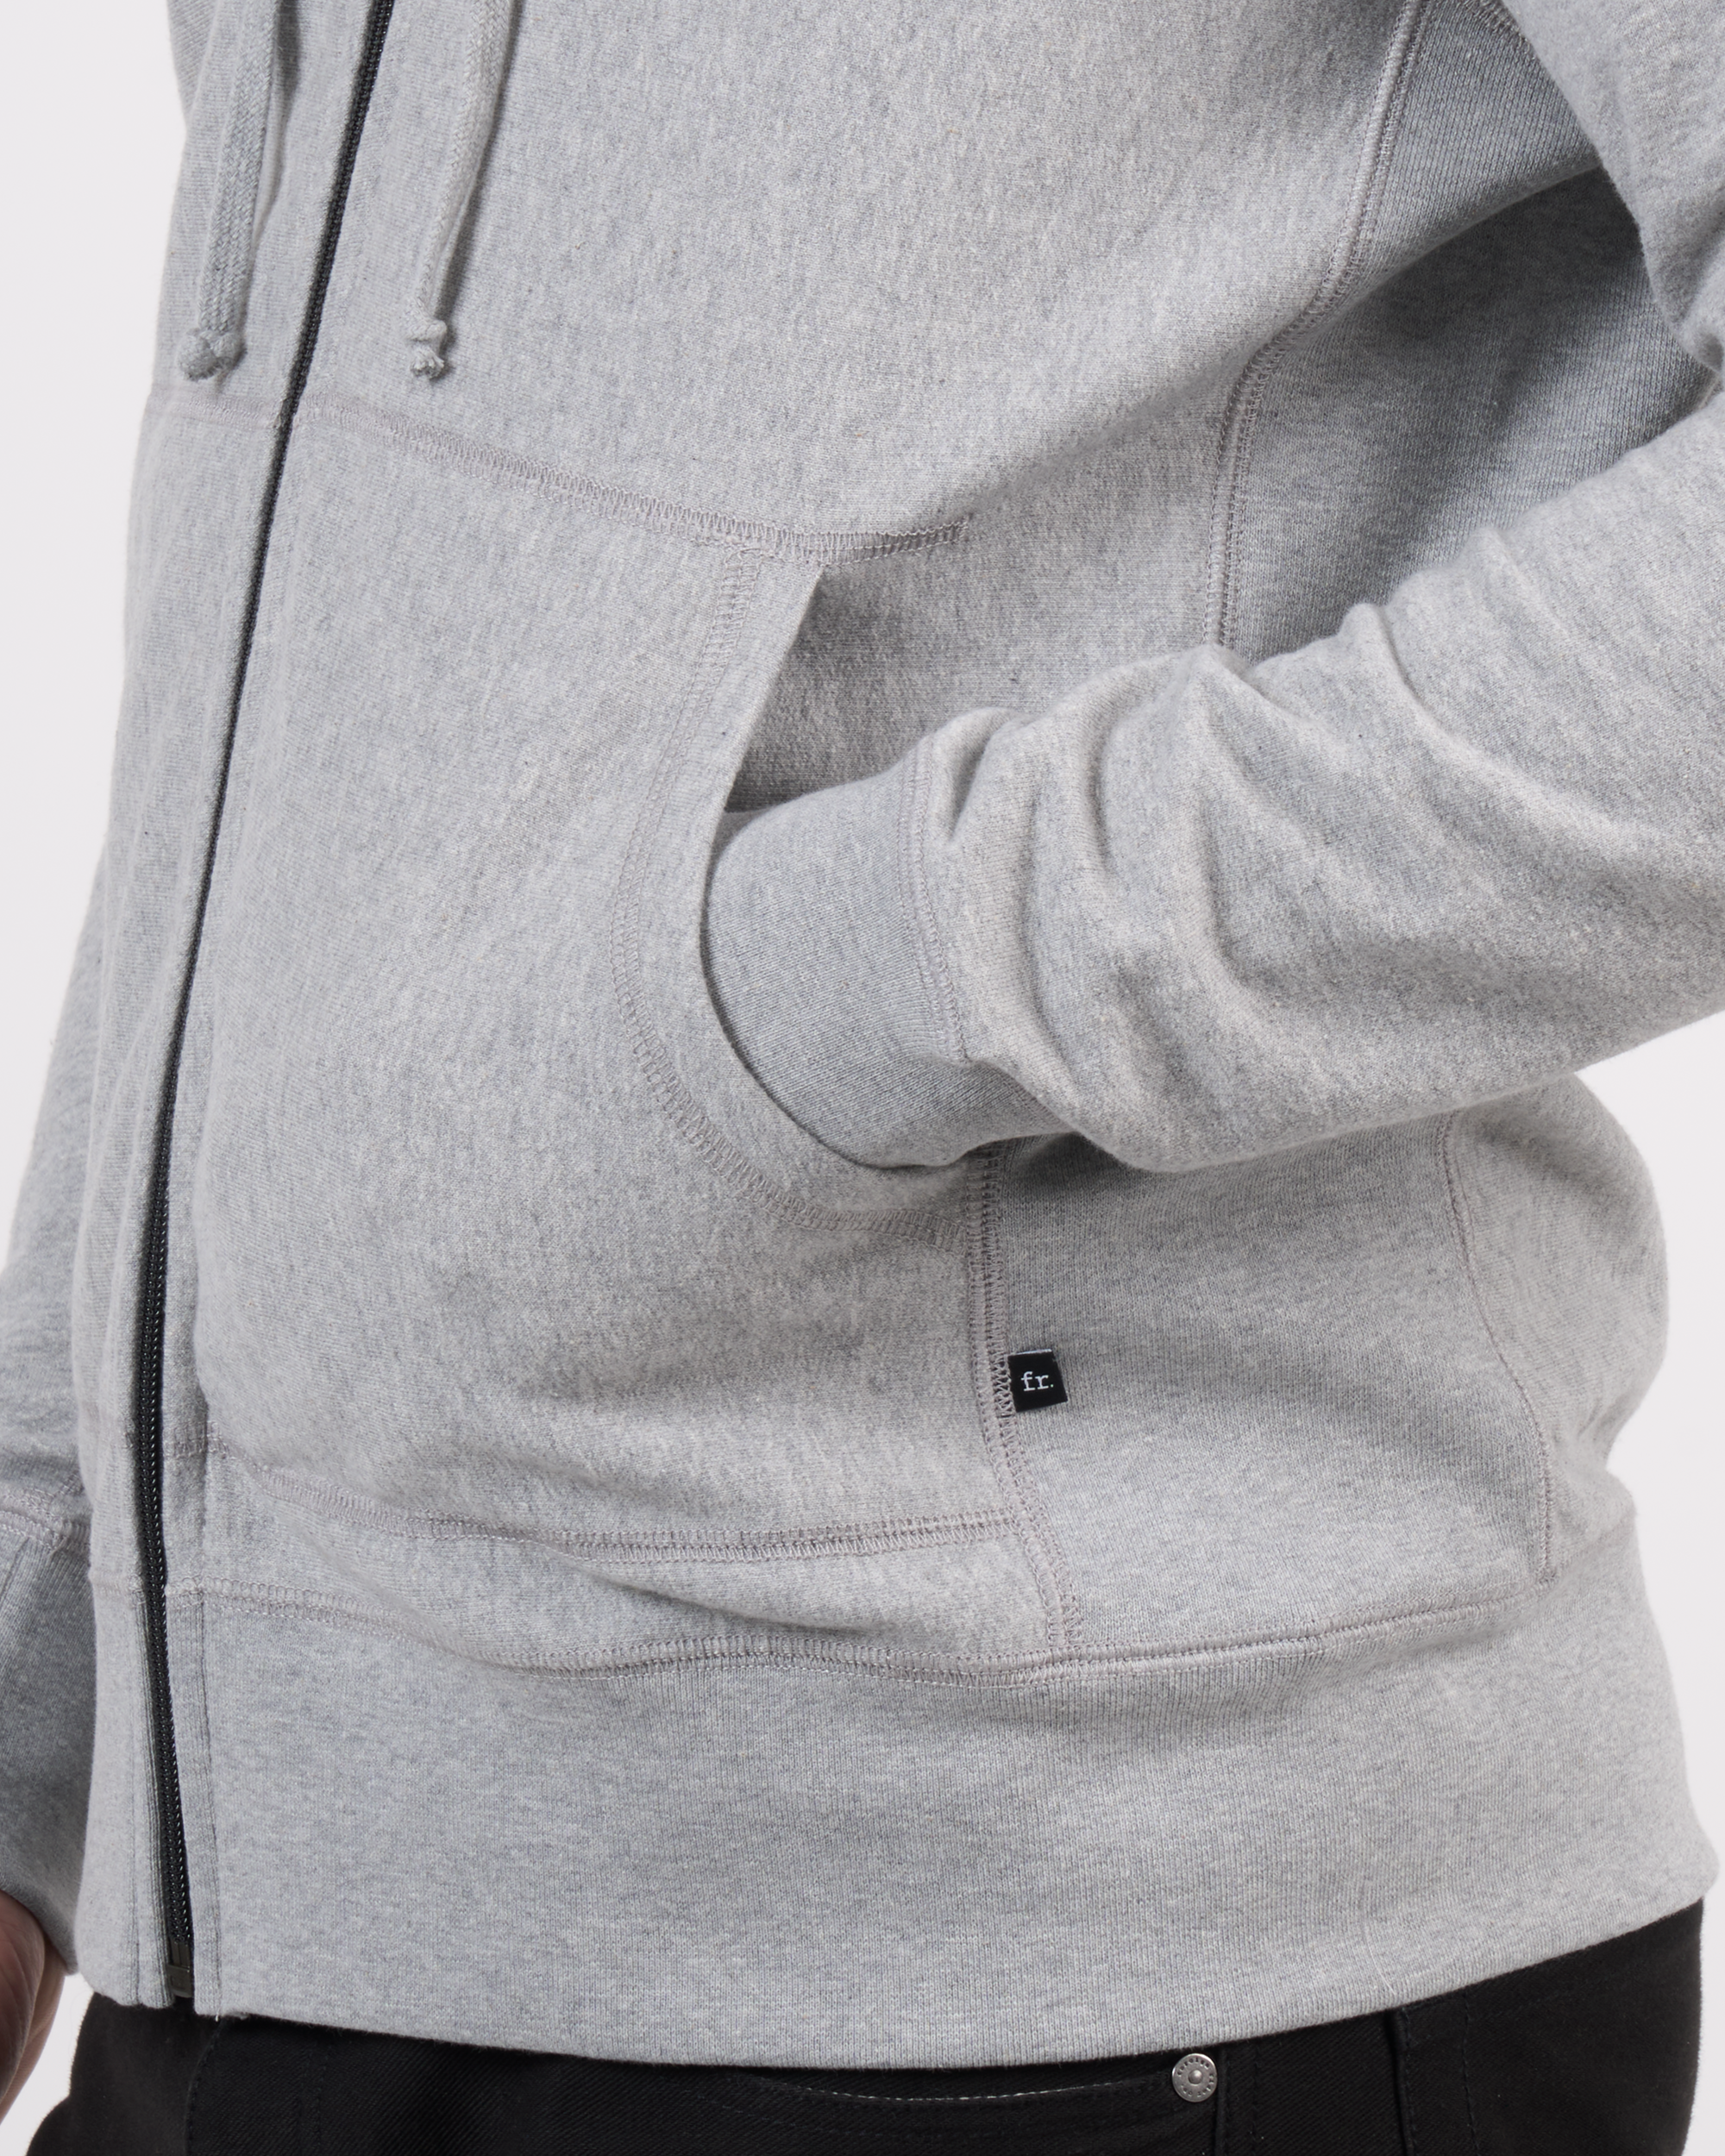 Foreign Rider Co Organic Cotton Grey Zip Hoodie Sweater Front Hand Pocket Detail